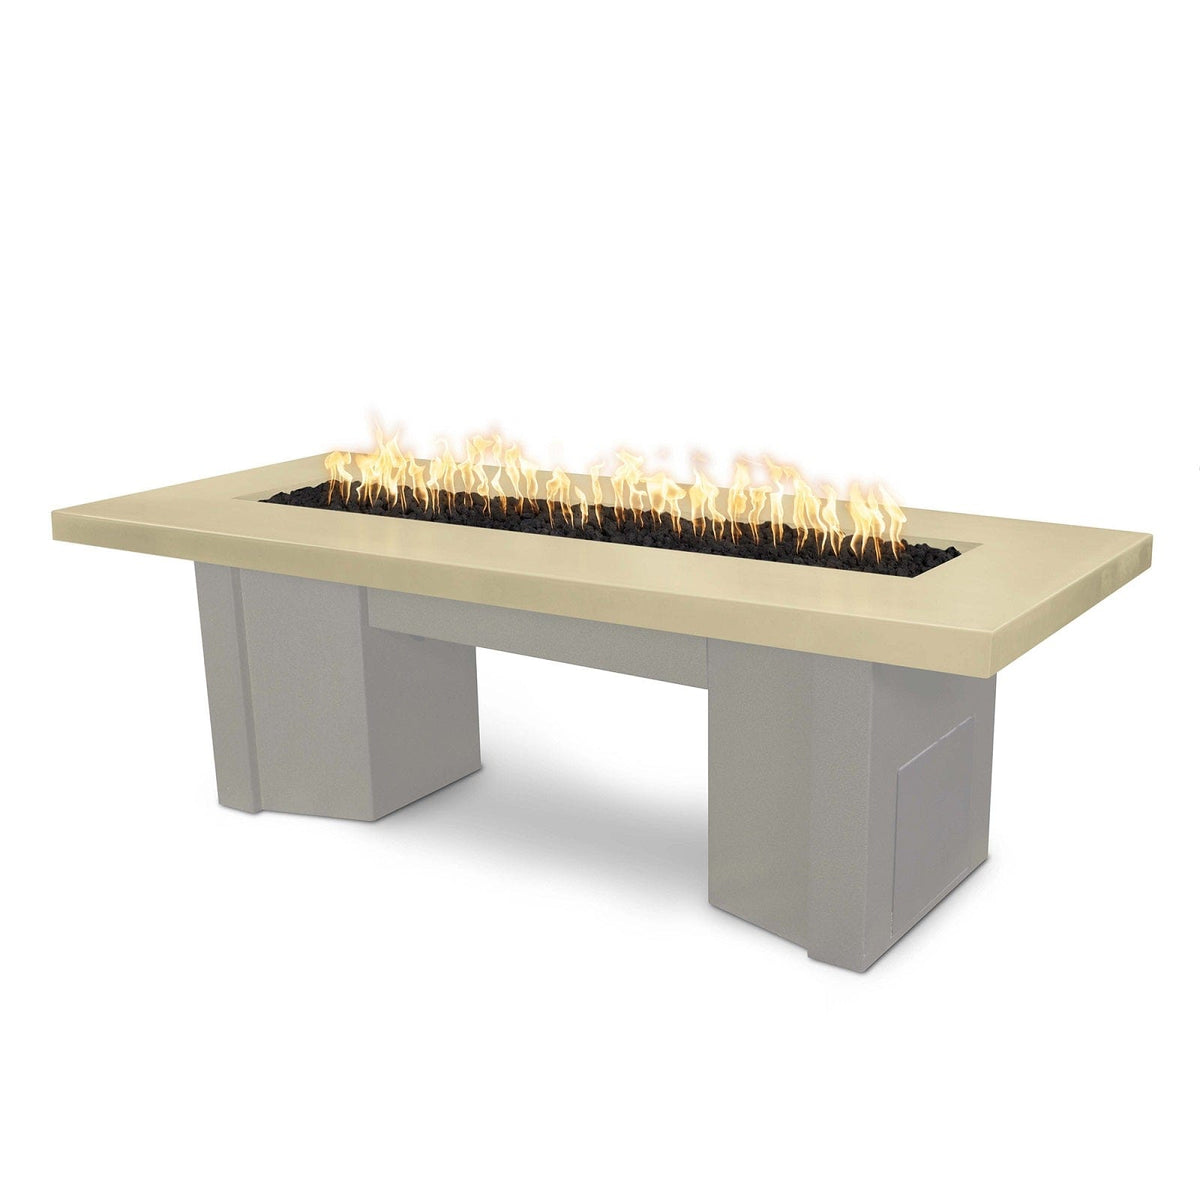 The Outdoor Plus Fire Features Vanilla (-VAN) / Pewter Powder Coated Steel (-PEW) The Outdoor Plus 78&quot; Alameda Fire Table Smooth Concrete in Natural Gas - Flame Sense System with Push Button Spark Igniter / OPT-ALMGFRC78FSEN-NG